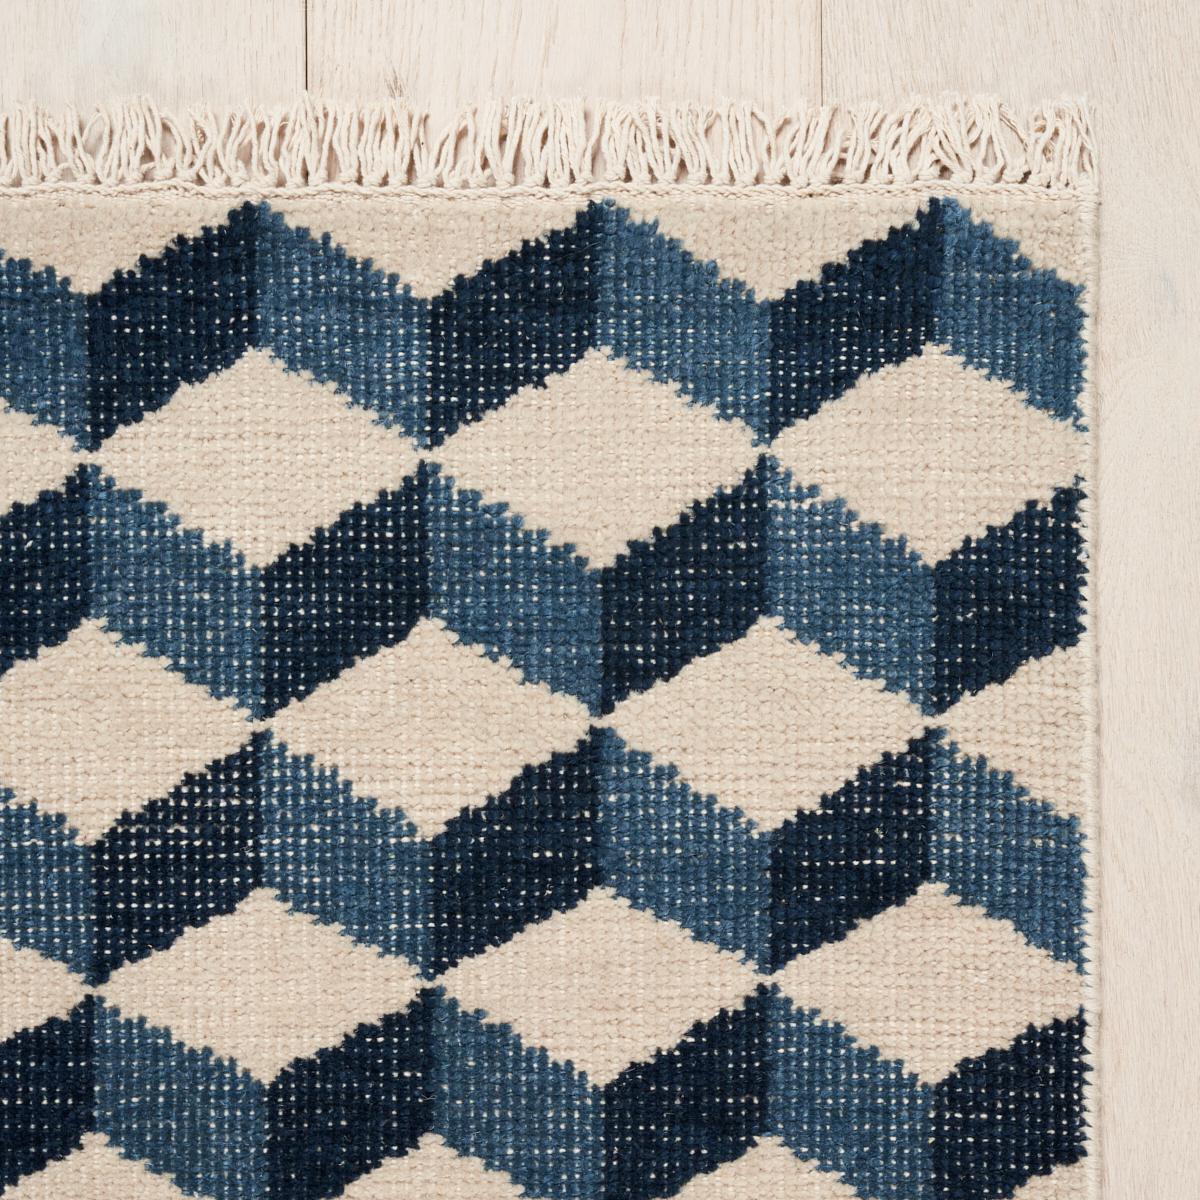 (8) Pompeii Hand Knotted Rugs in Blue, 5x7' at $1,750 each.

A timeless tumbling-block rug design, Pompeii features a versatile motif that is equally at home in modern and traditional interiors. With its graphic pattern, stylish fringe and soft wool